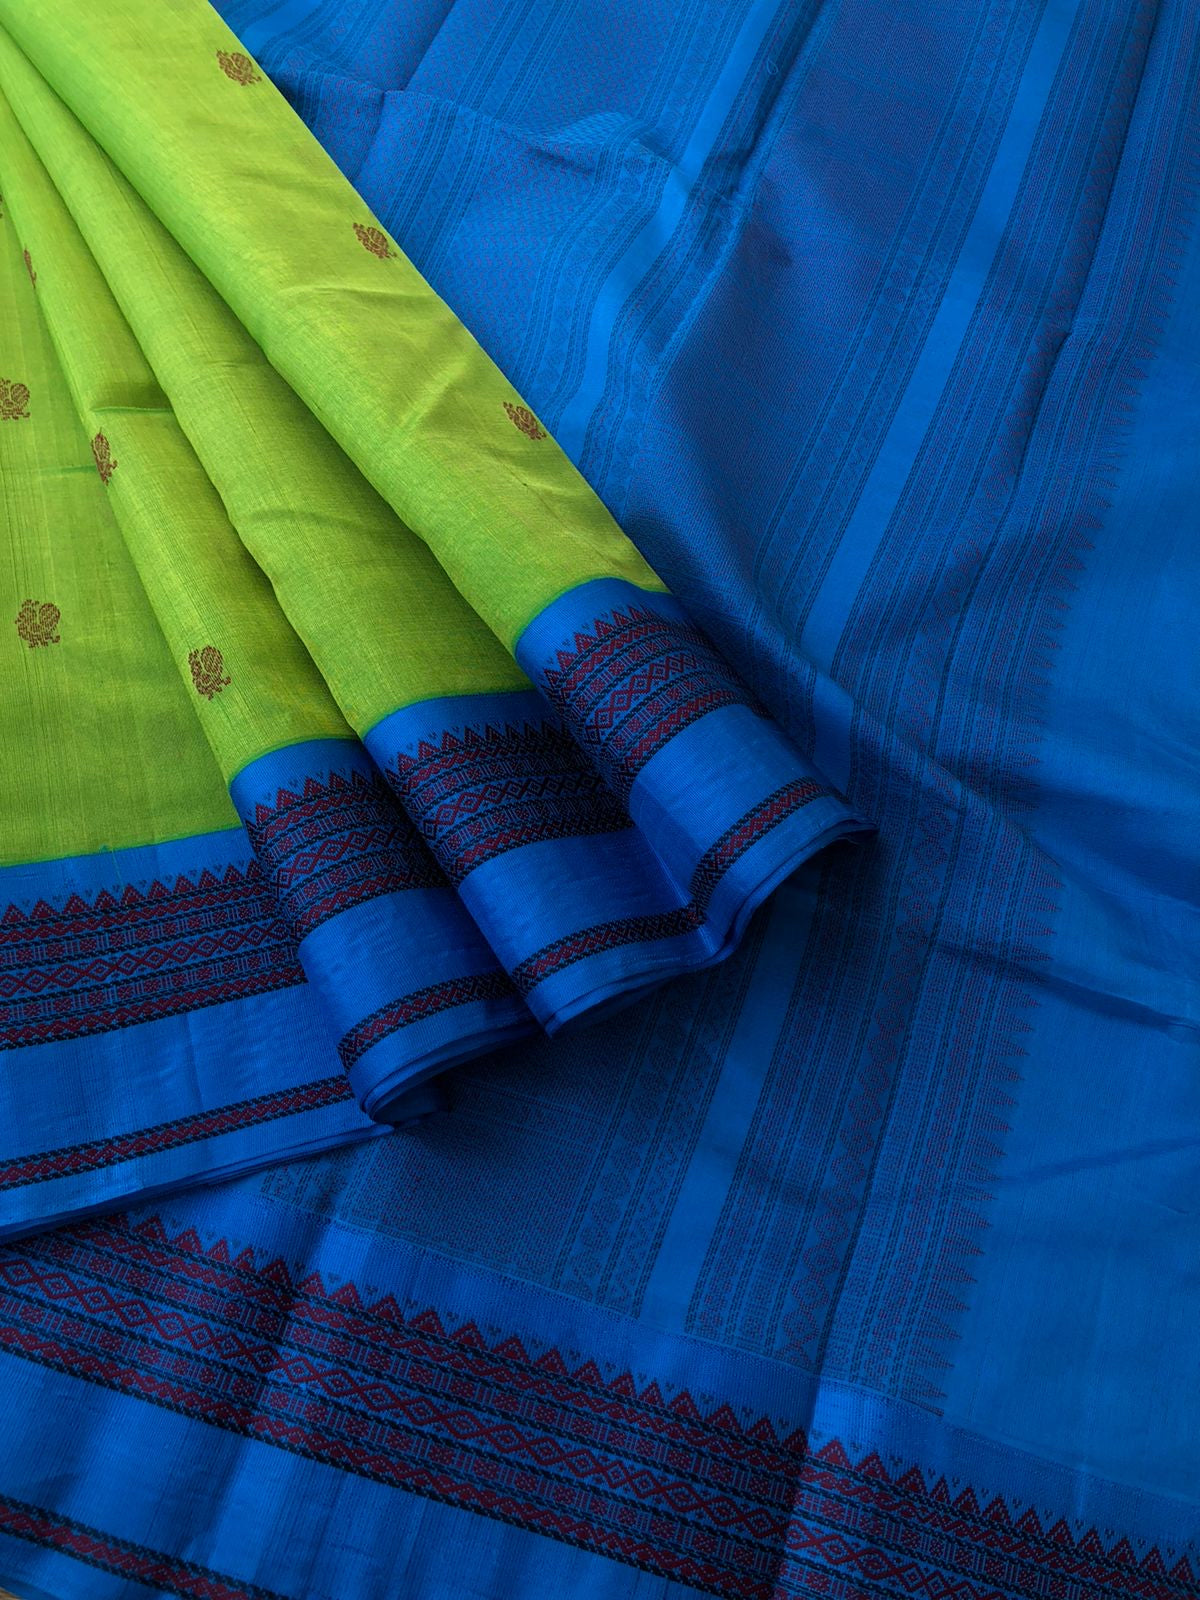 Korvai Silk Cotton with Pure Silk Woven Borders - apple green and blue